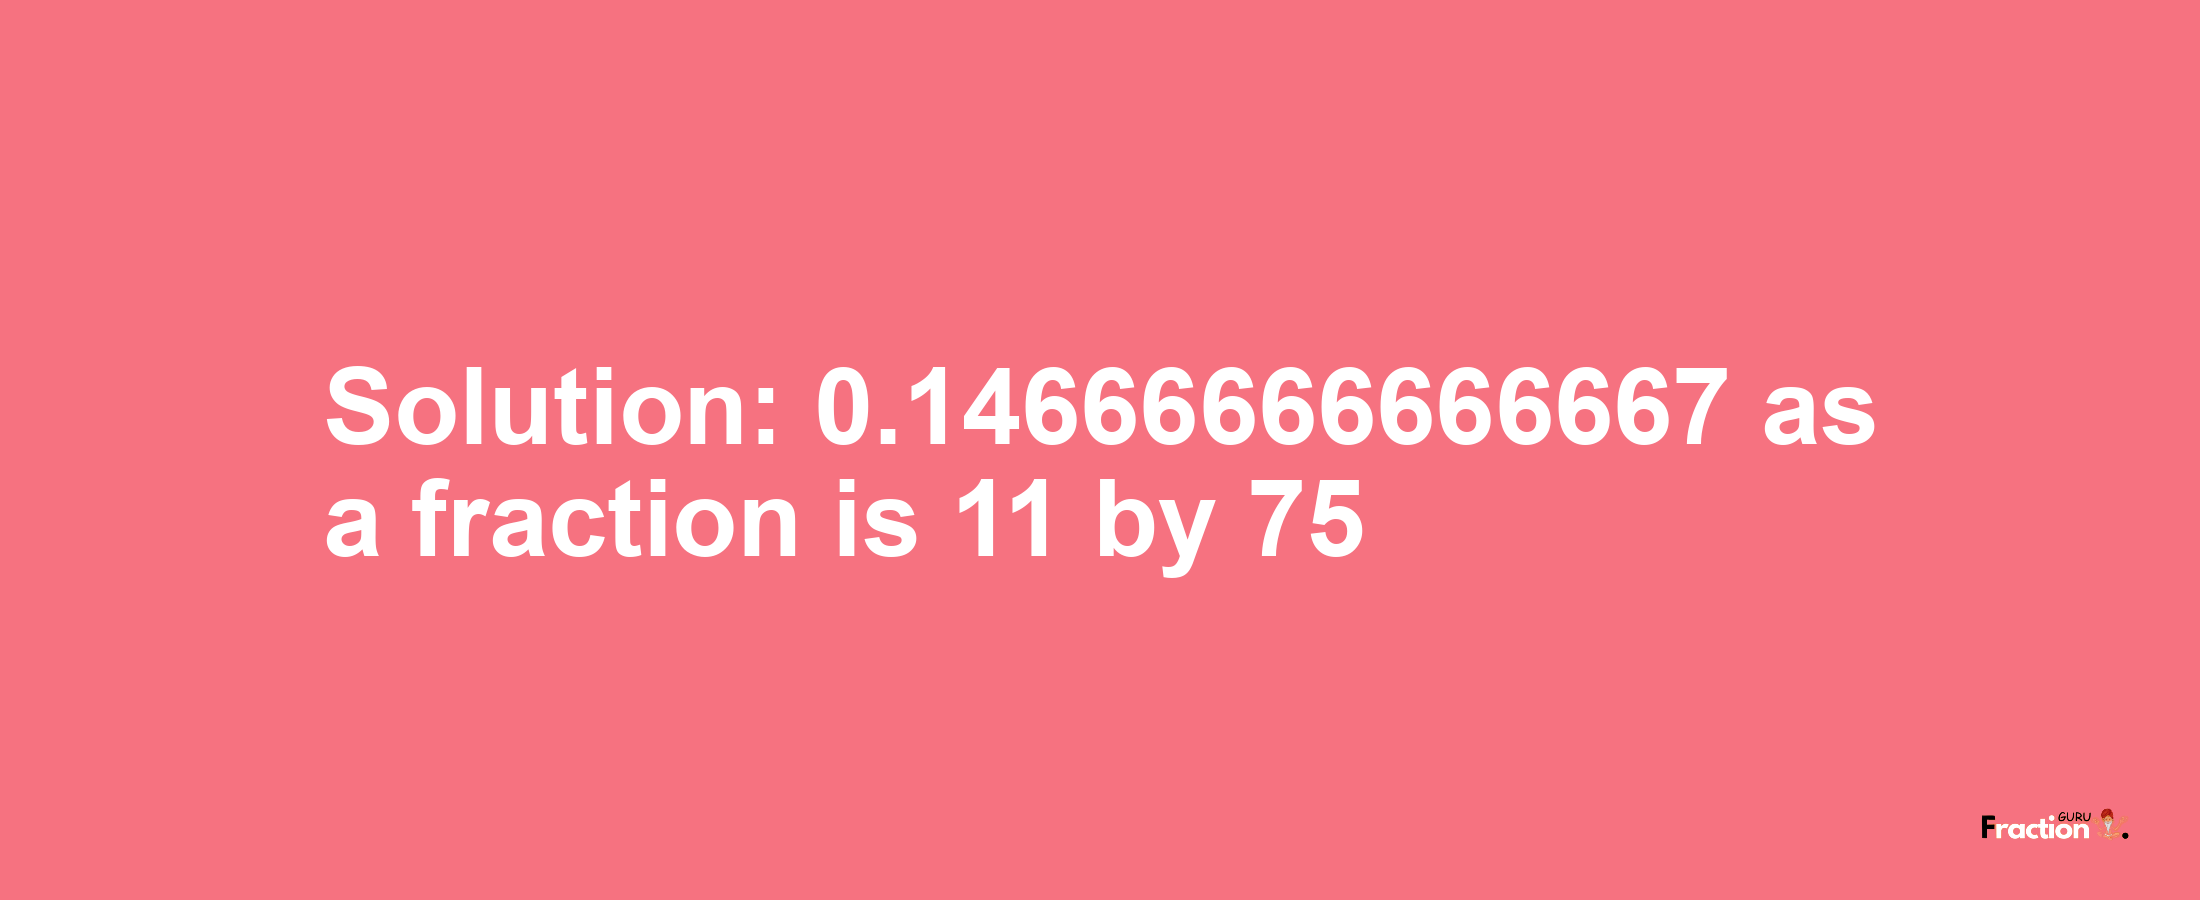 Solution:0.14666666666667 as a fraction is 11/75